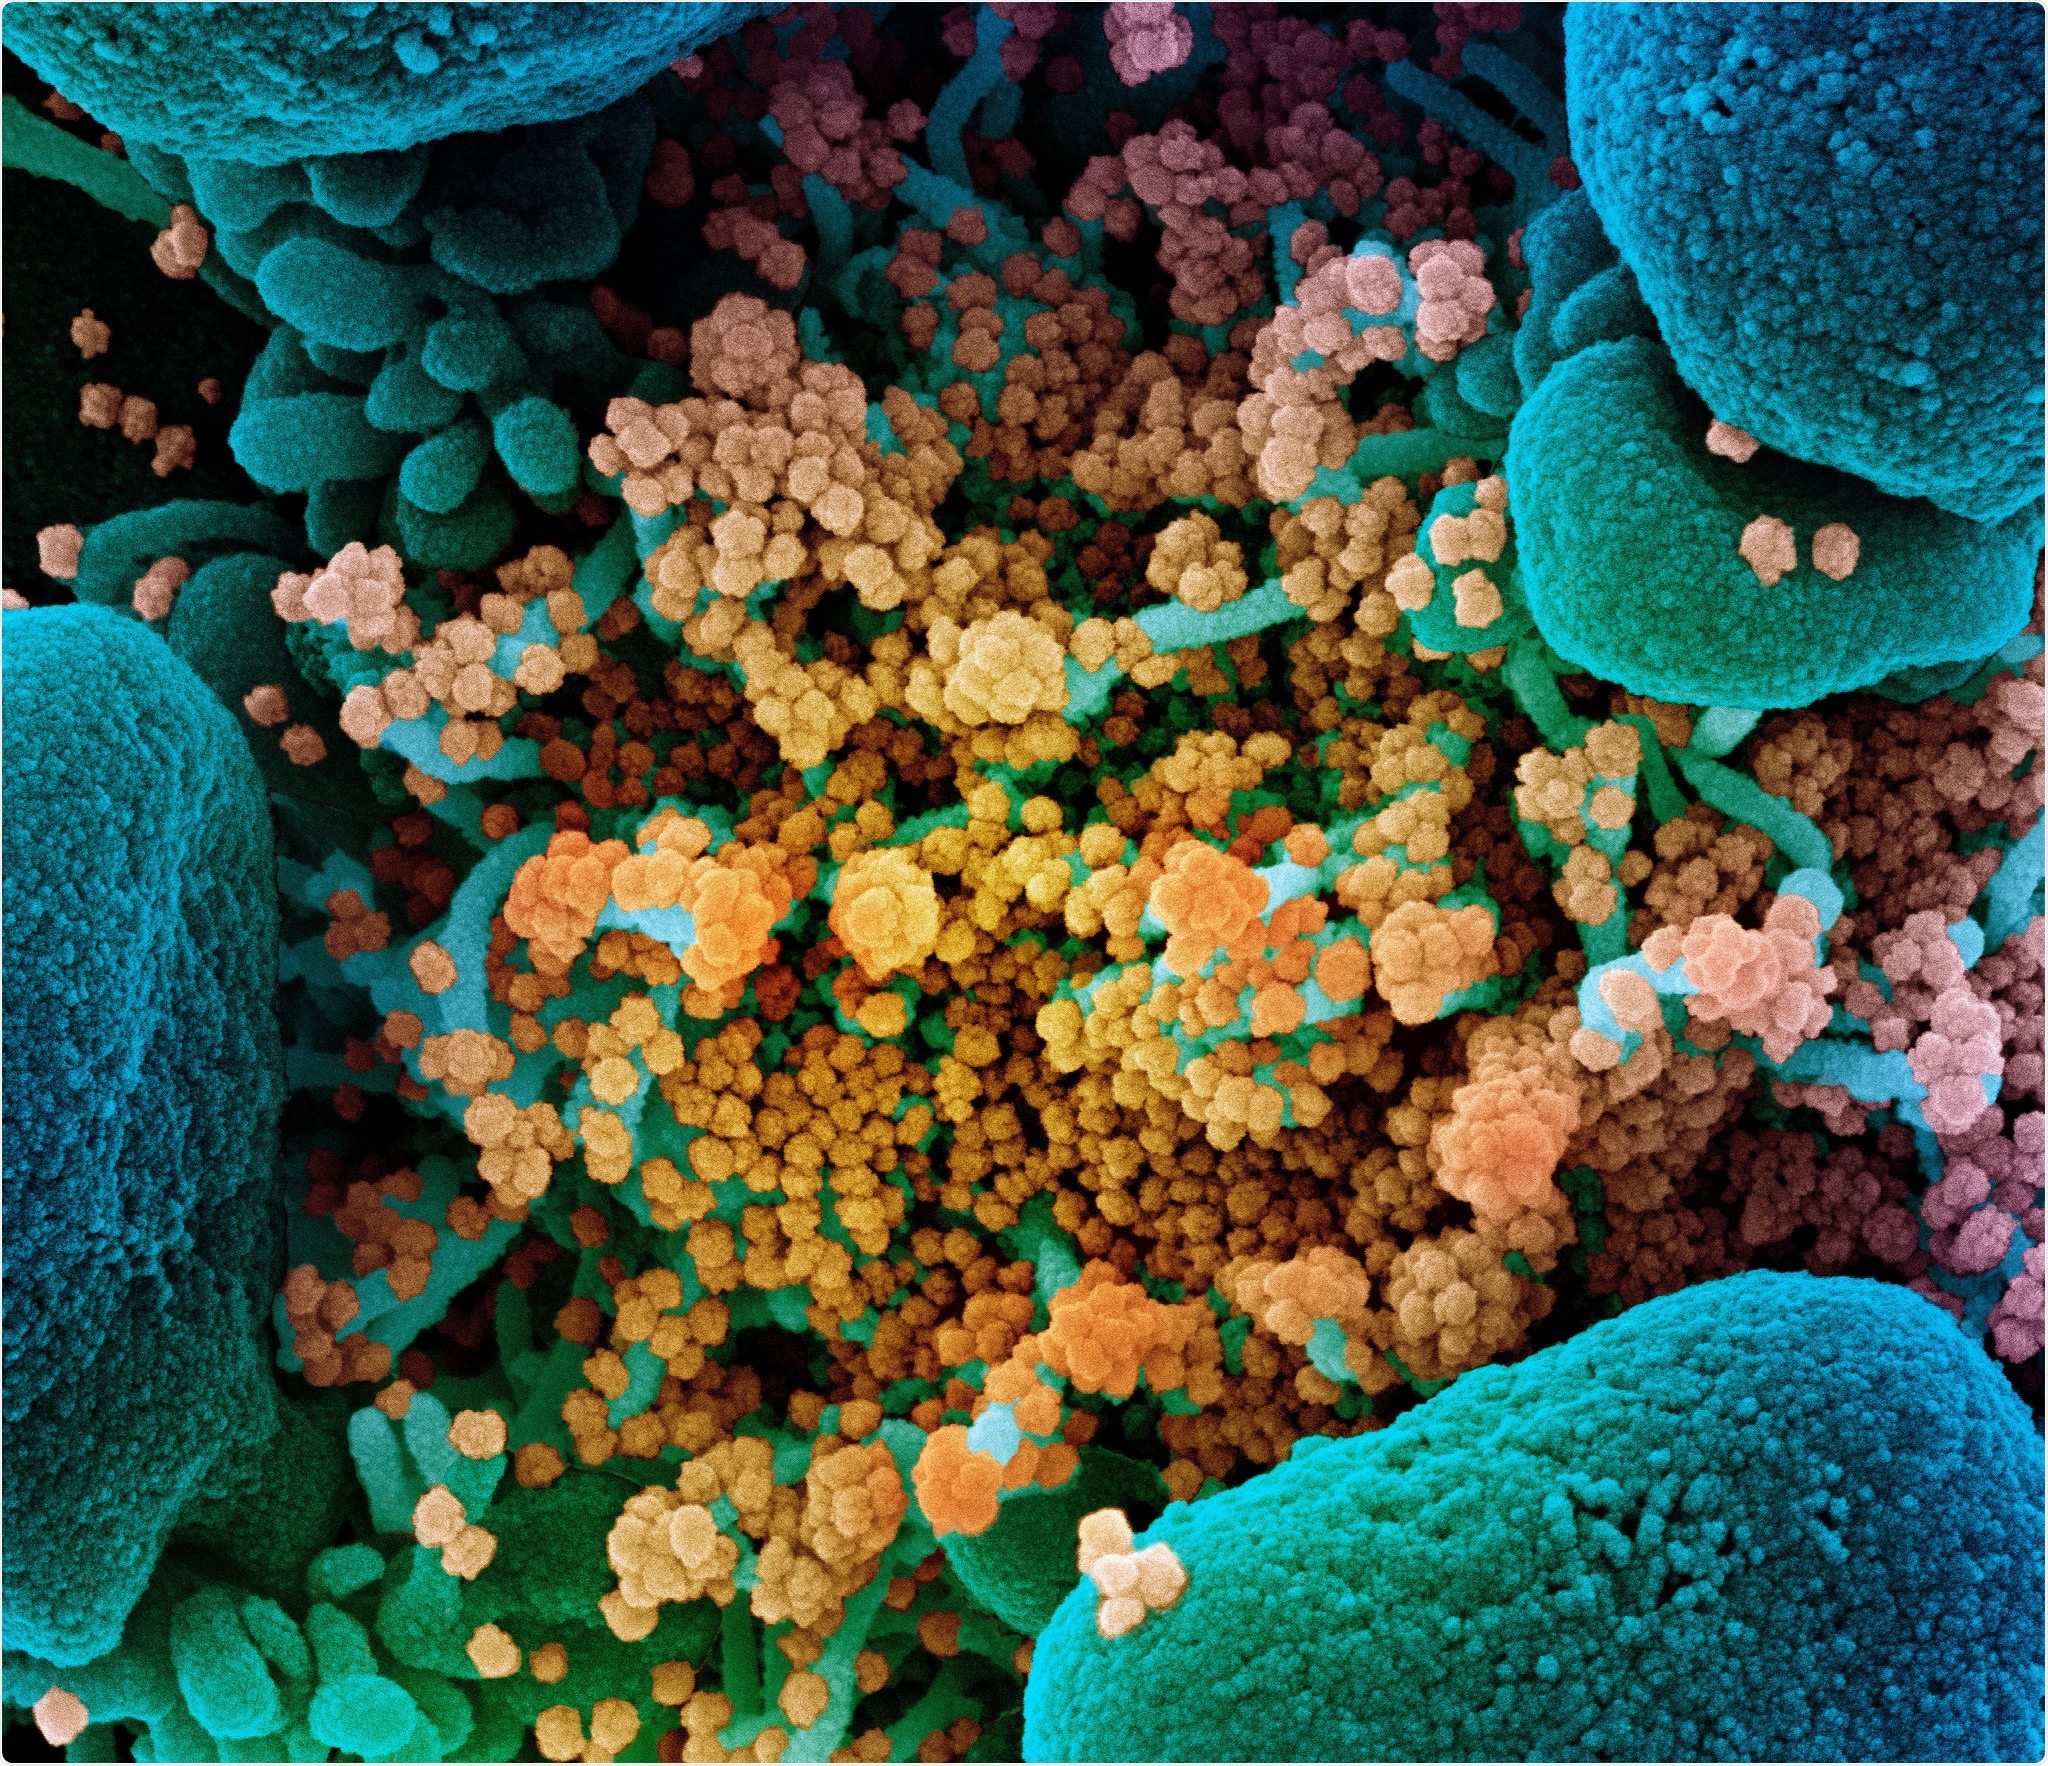 Novel Coronavirus SARS-CoV-2 Colorized scanning electron micrograph of an apoptotic cell (blue) heavily infected with SARS-COV-2 virus particles (yellow), isolated from a patient sample. Image captured at the NIAID Integrated Research Facility (IRF) in Fort Detrick, Maryland. Credit: NIAID